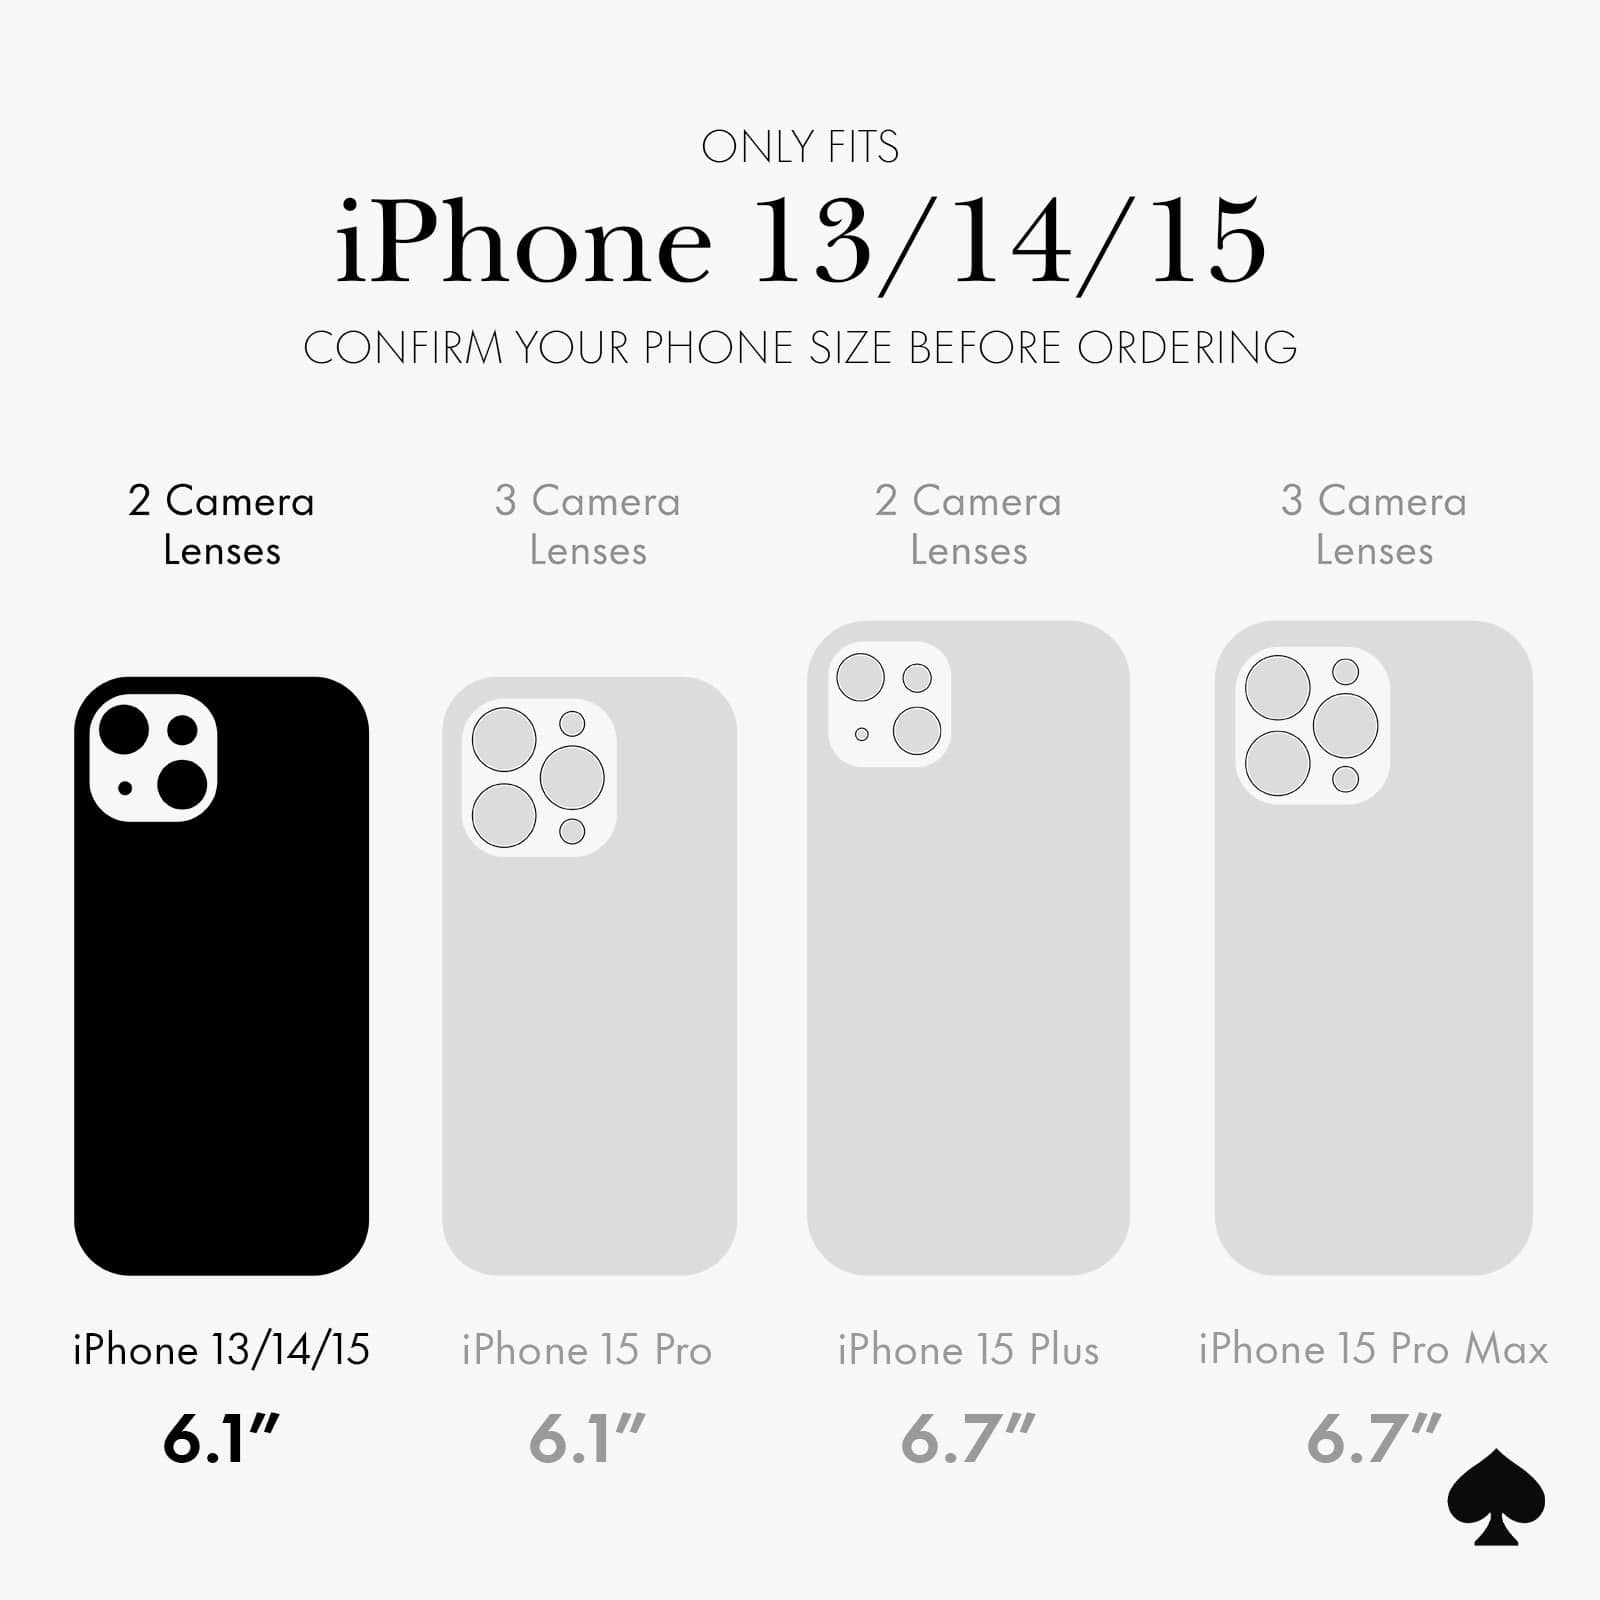 ONLY FITS IPHONE 13/ 14/ 15 CONFIRM YOUR PHONE SIZE BEFORE ORDERING